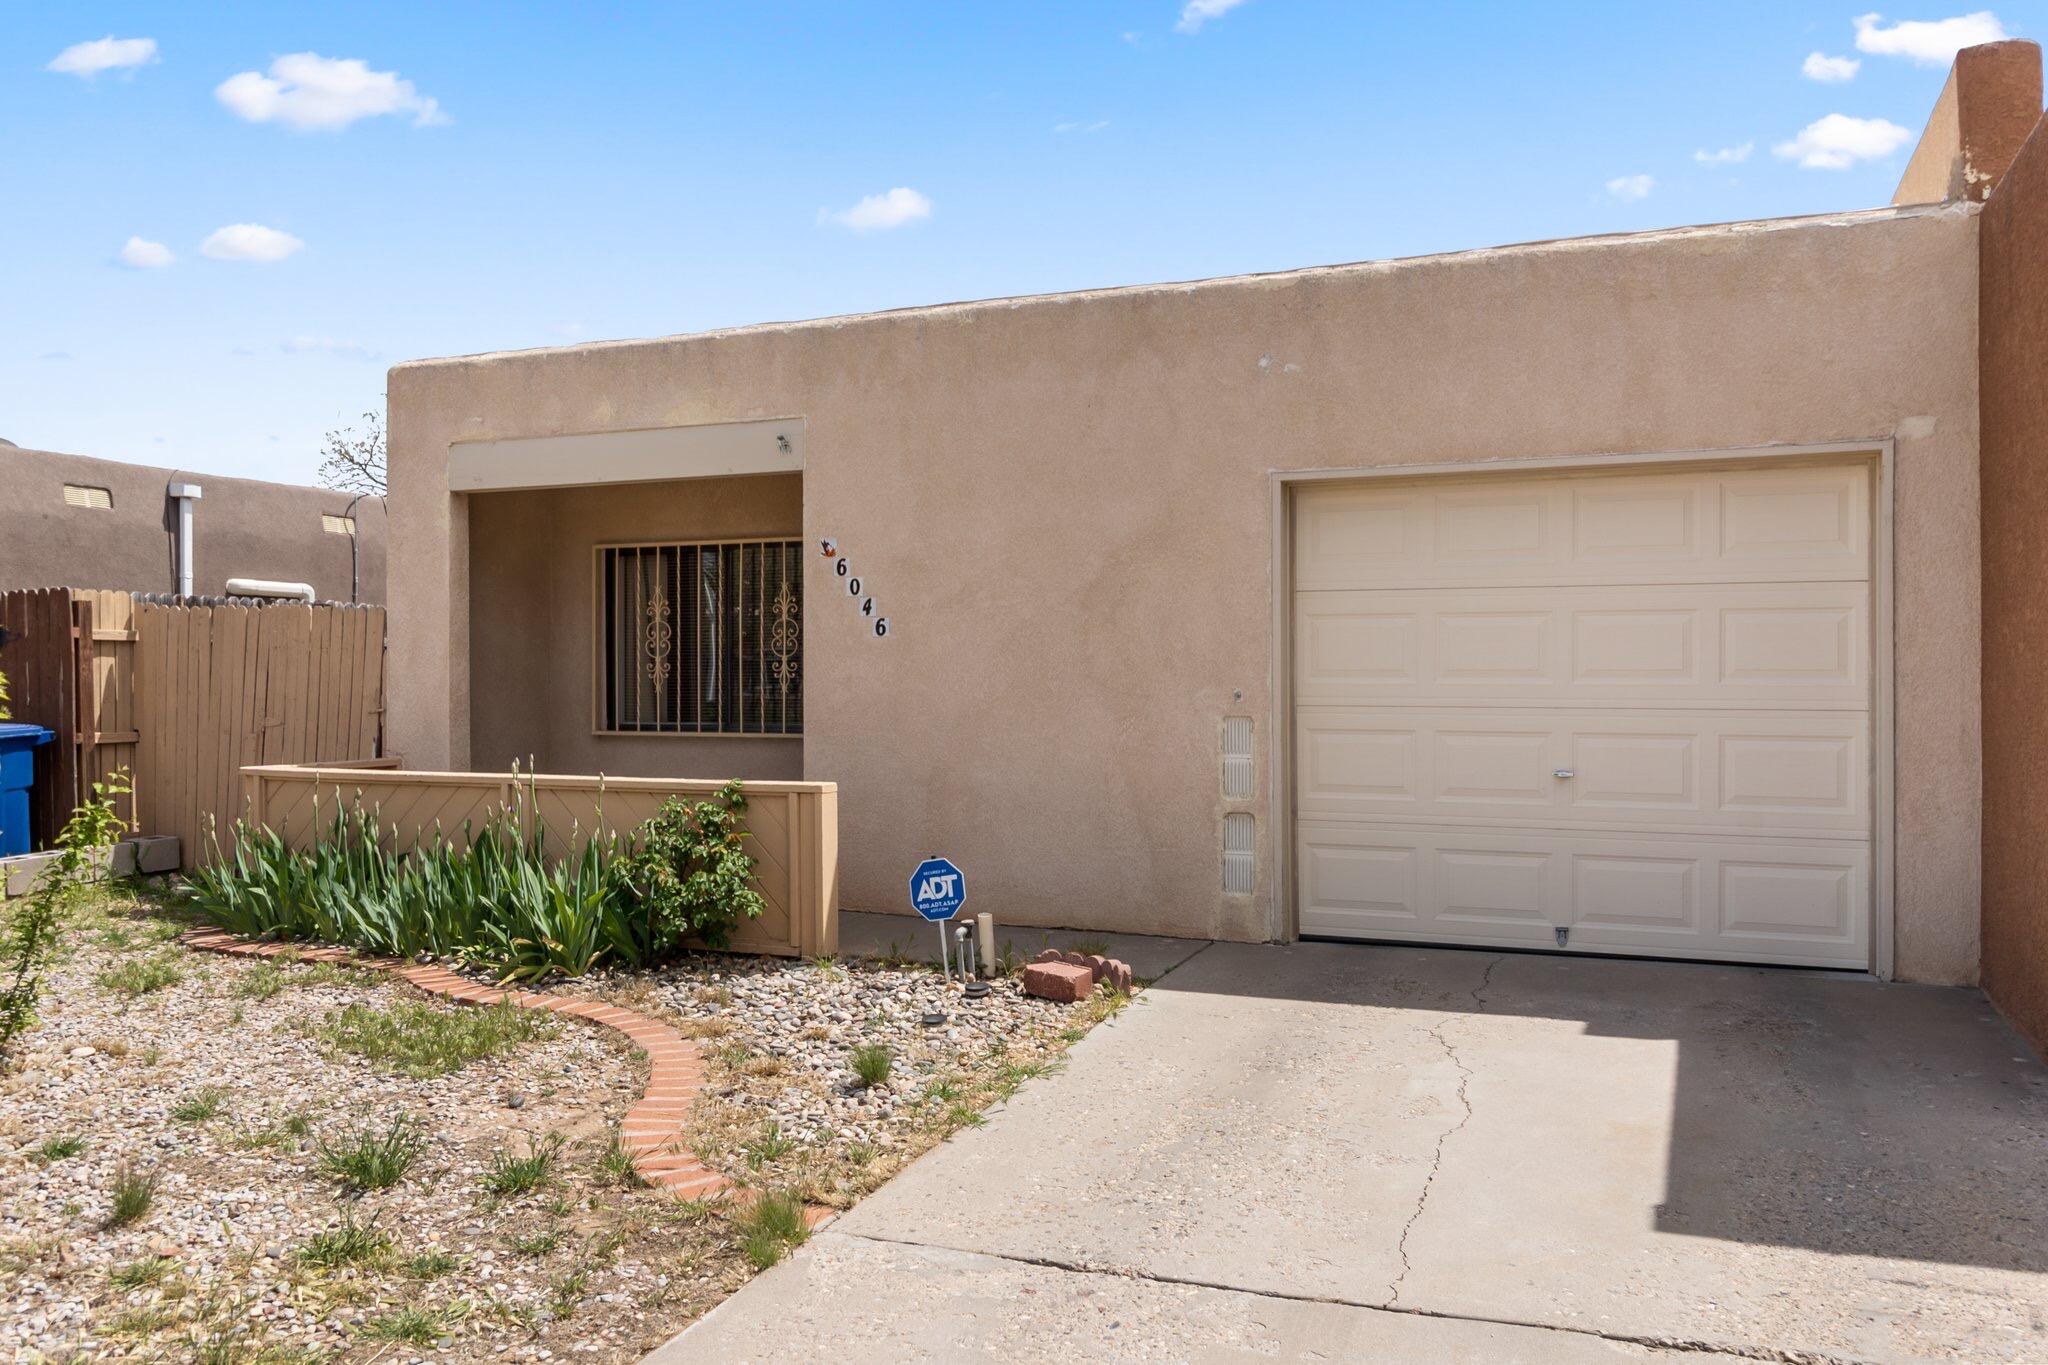 SOLD BEFORE ACTIVE. This 2 bed/2 bath/1 car garage charmer comes with a cozy front porch sitting area for warm summer ABQ evenings. Inside, you'll find carpeted living areas and easy-to-clean flooring in the kitchen. Bedrooms are just the right size with storage capacity in the closets. Cook with ease and comfort in the U-shaped kitchen with ample counter seating, a convenient pantry, and classic, homey cabinetry. Private backyard is all fenced-in for those who love spending quiet time outdoors. Wrought iron secure windows provide added peace of mind. You will be just minutes away from golfing, gyms, and plenty of foodie-approved restaurants. With its unbeatable combination of comfort, you'll want to call today!